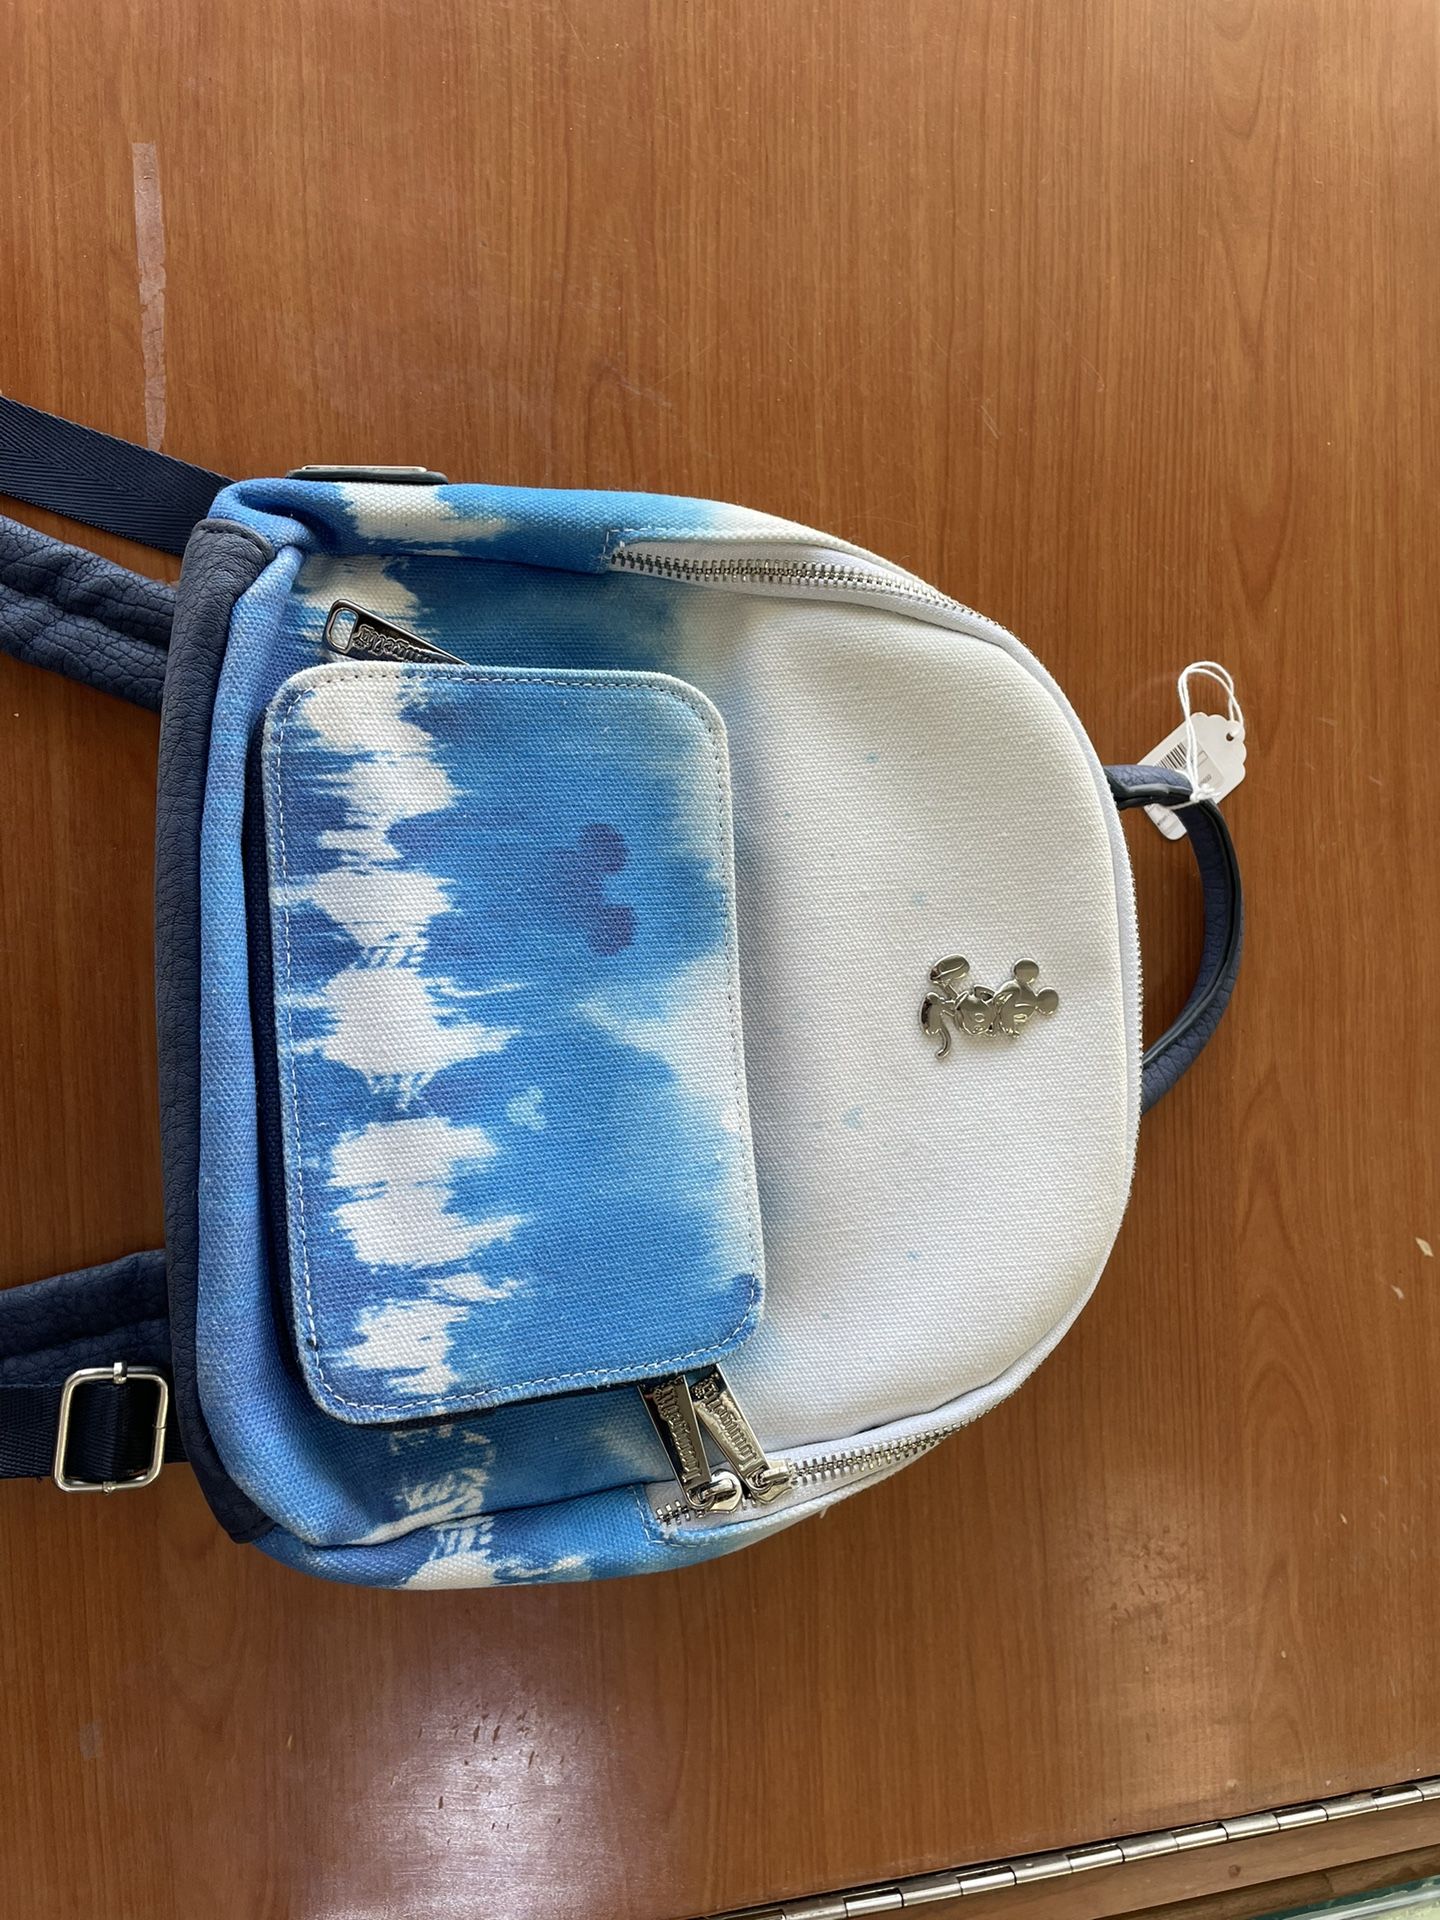 Disney Loungefly Fabric White And Blue Backpack With Leather Straps